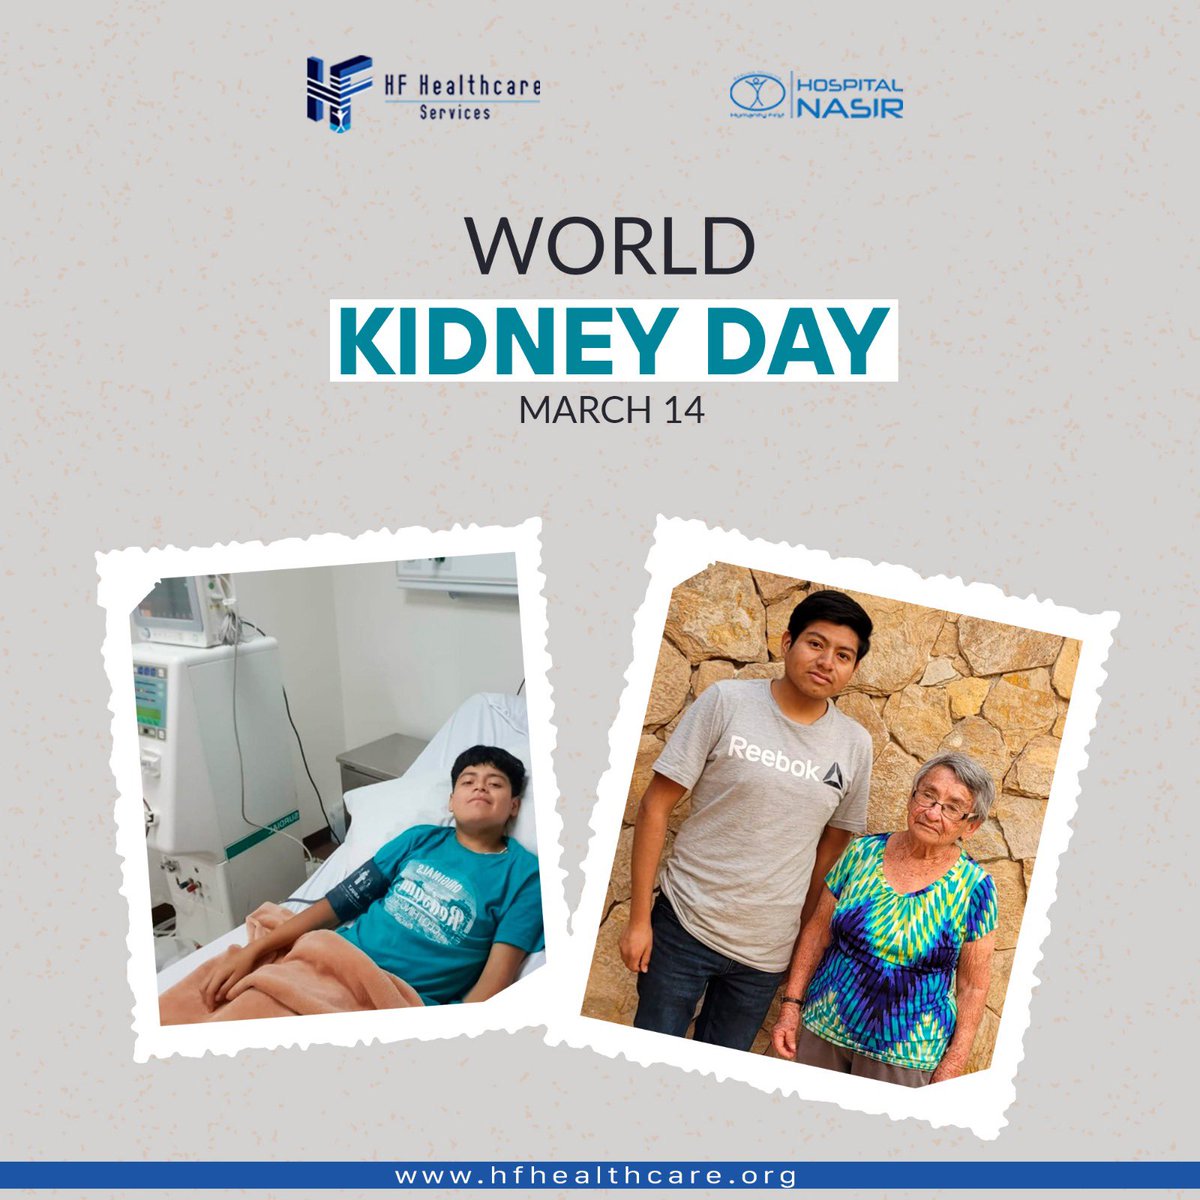 Under the words World Kidney Day March 14 are two pictures of a young man. In one he lies in a hospital bed connected to a dialysis machine and in the other he stands next to an elderly woman. Logos at the top are HF Healthcare Services and Hospital Nasir.